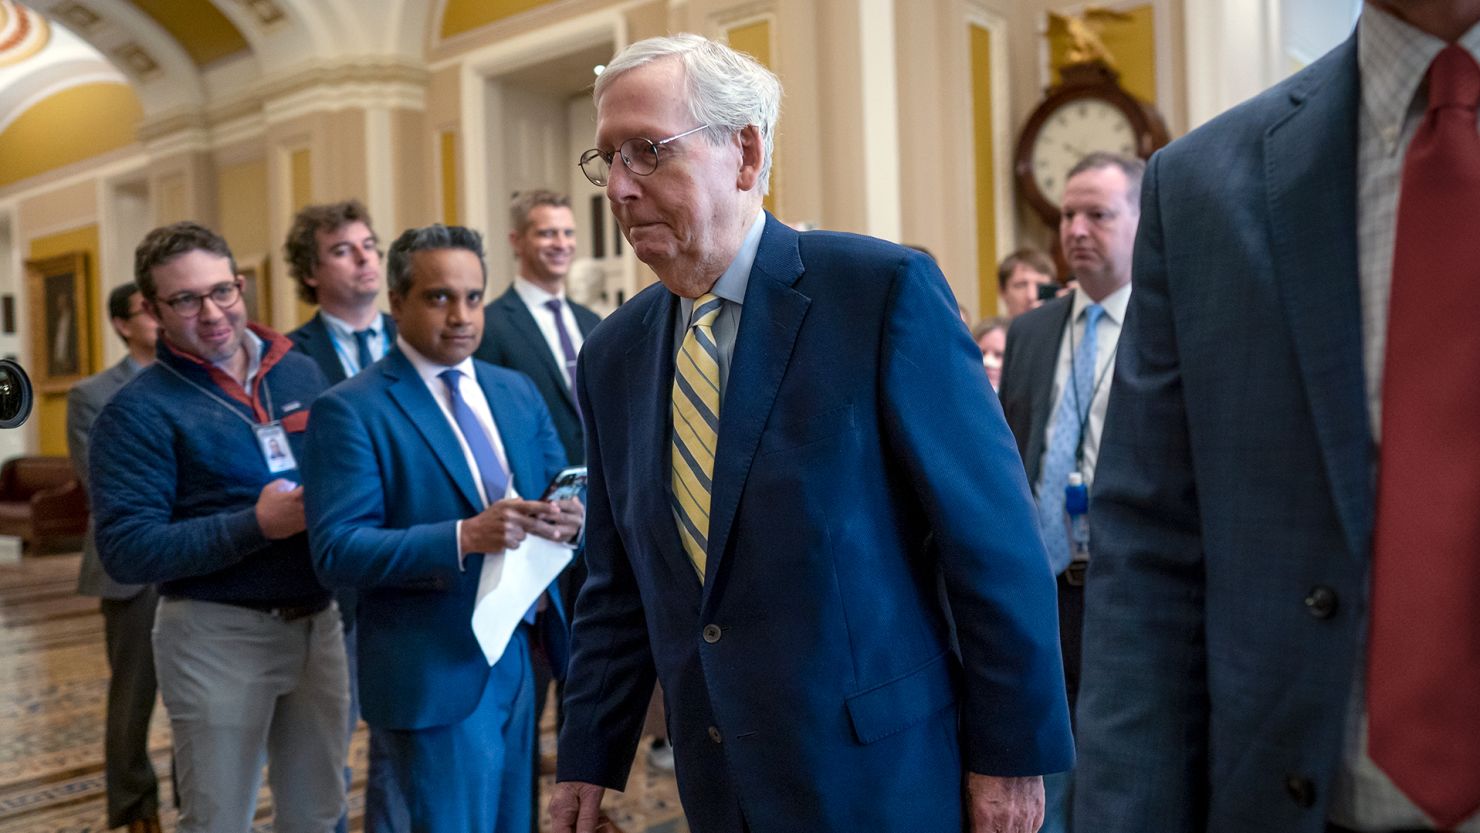 Senate Minority Leader Mitch McConnell returns to the chamber almost six weeks after a fall that left him with a rib fracture and concussion, at the Capitol in Washington, Monday, April 17.